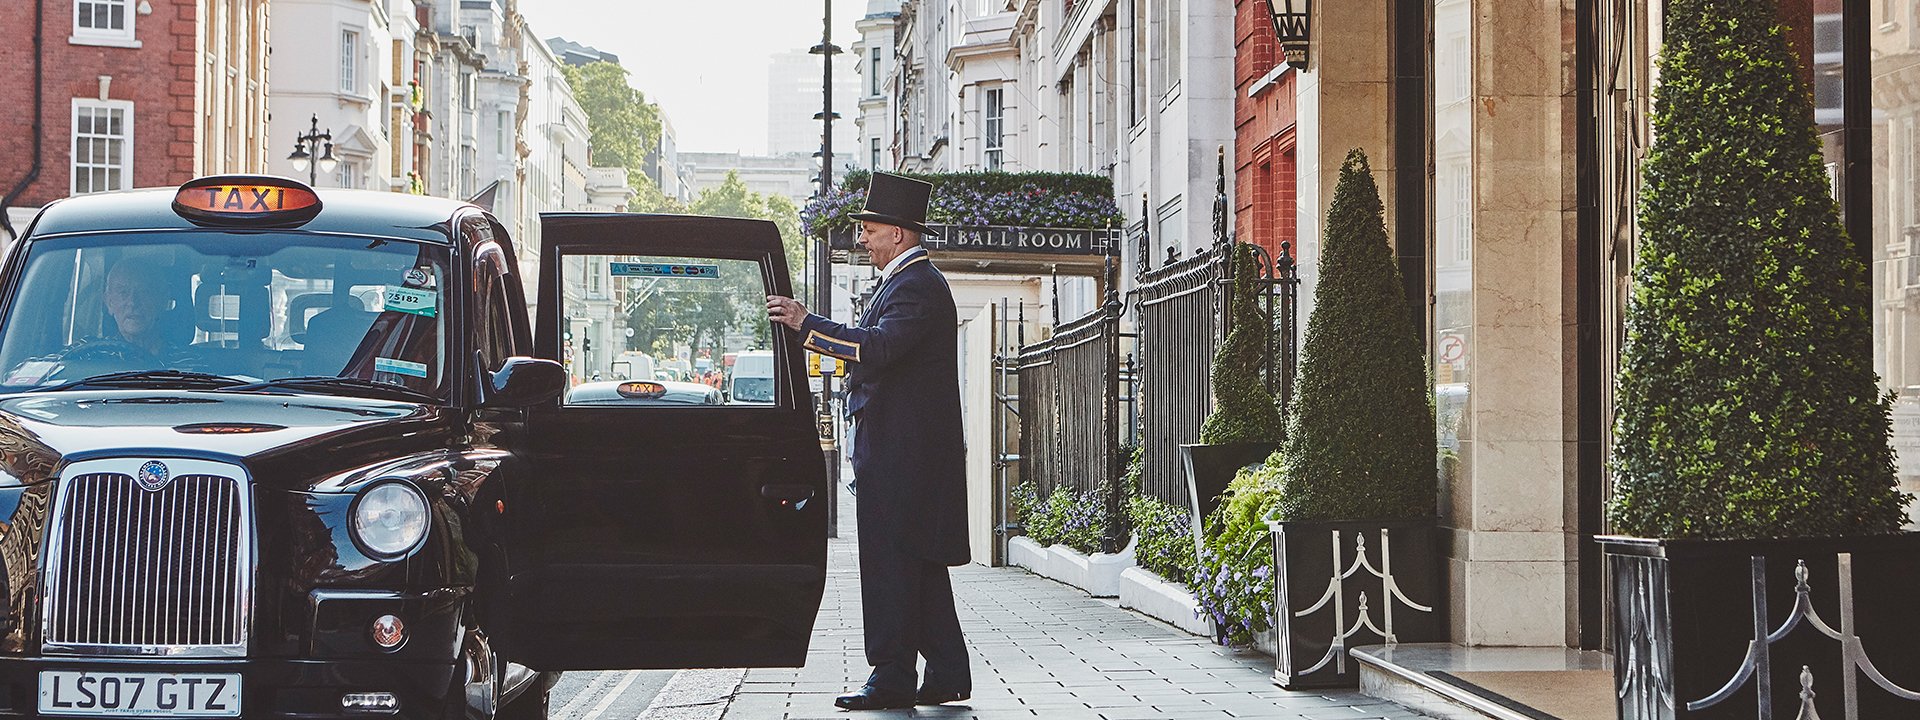 A doorman who opens the door of a taxi outside Claridge's Hotel and welcomes guests.